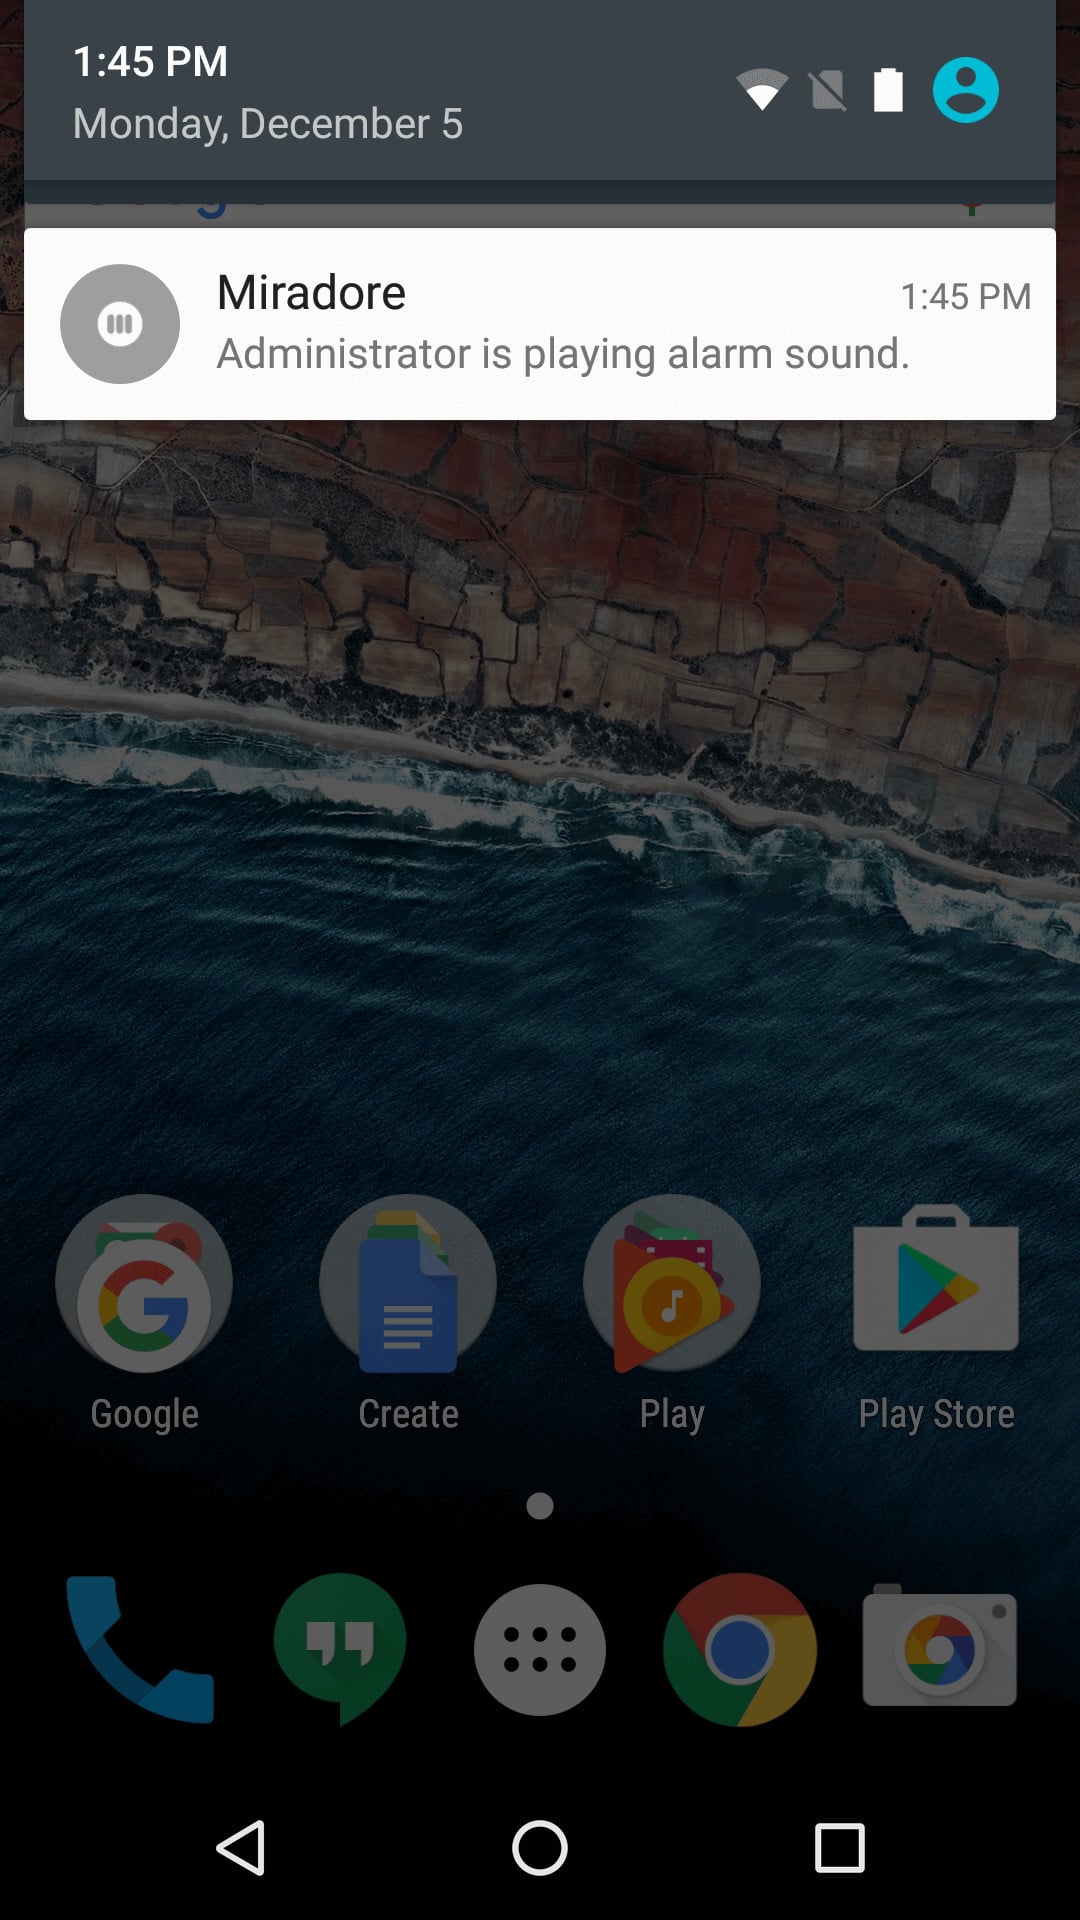 Alarm sound notification shown as a push up notification.